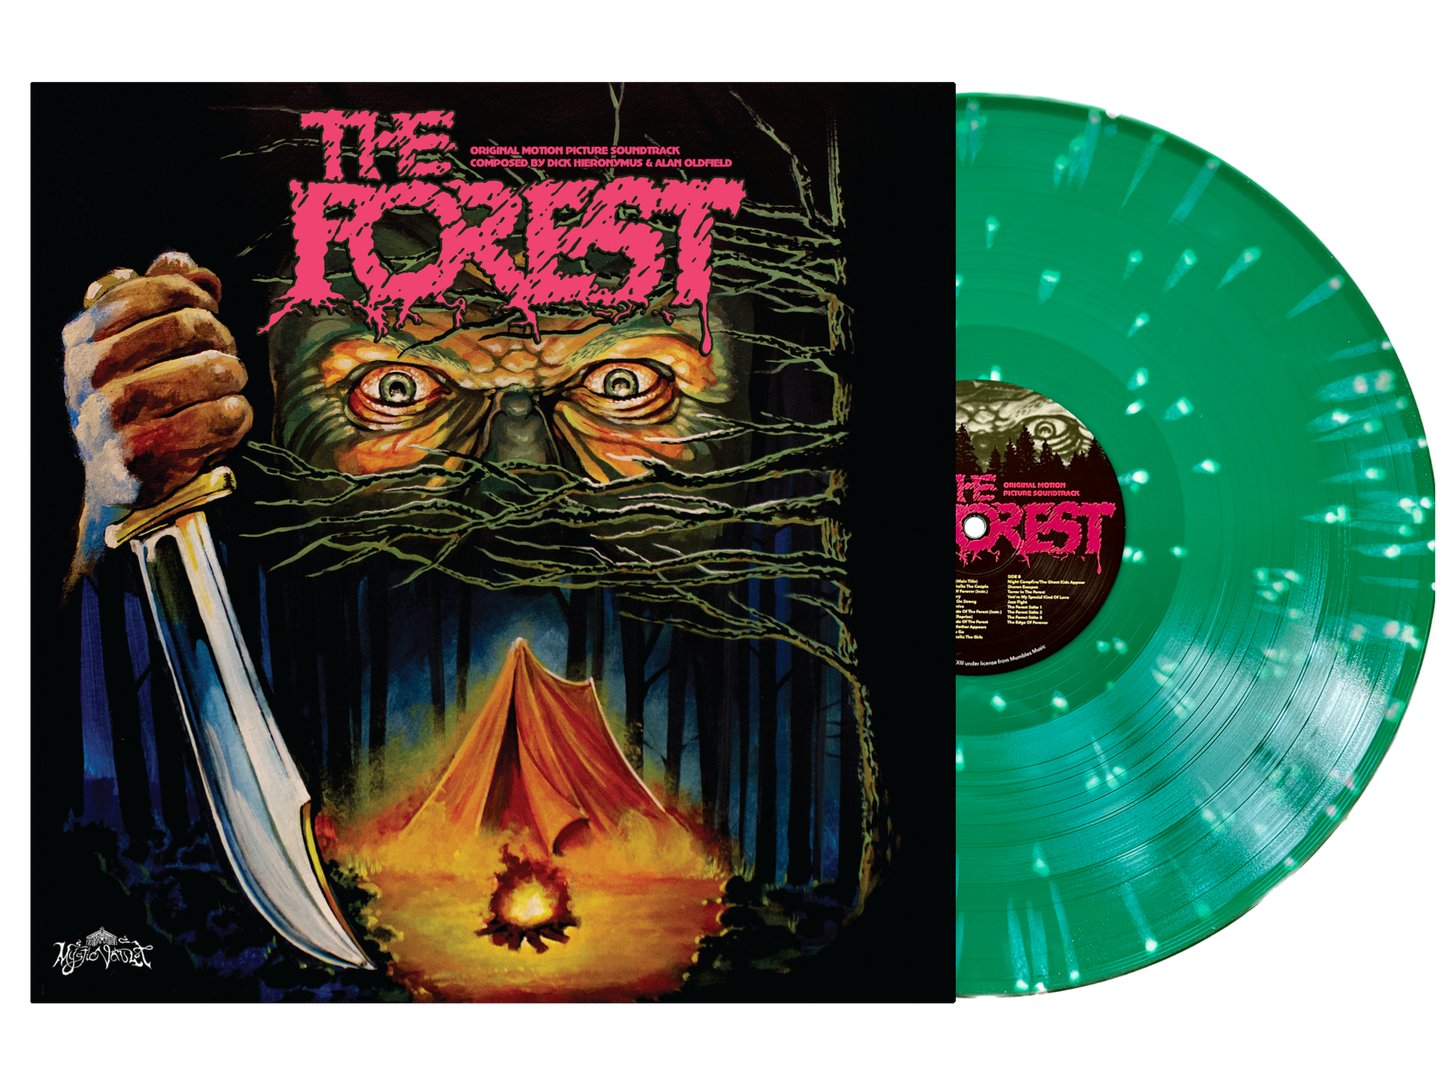 THE FOREST (1982) SOUNDTRACK LP